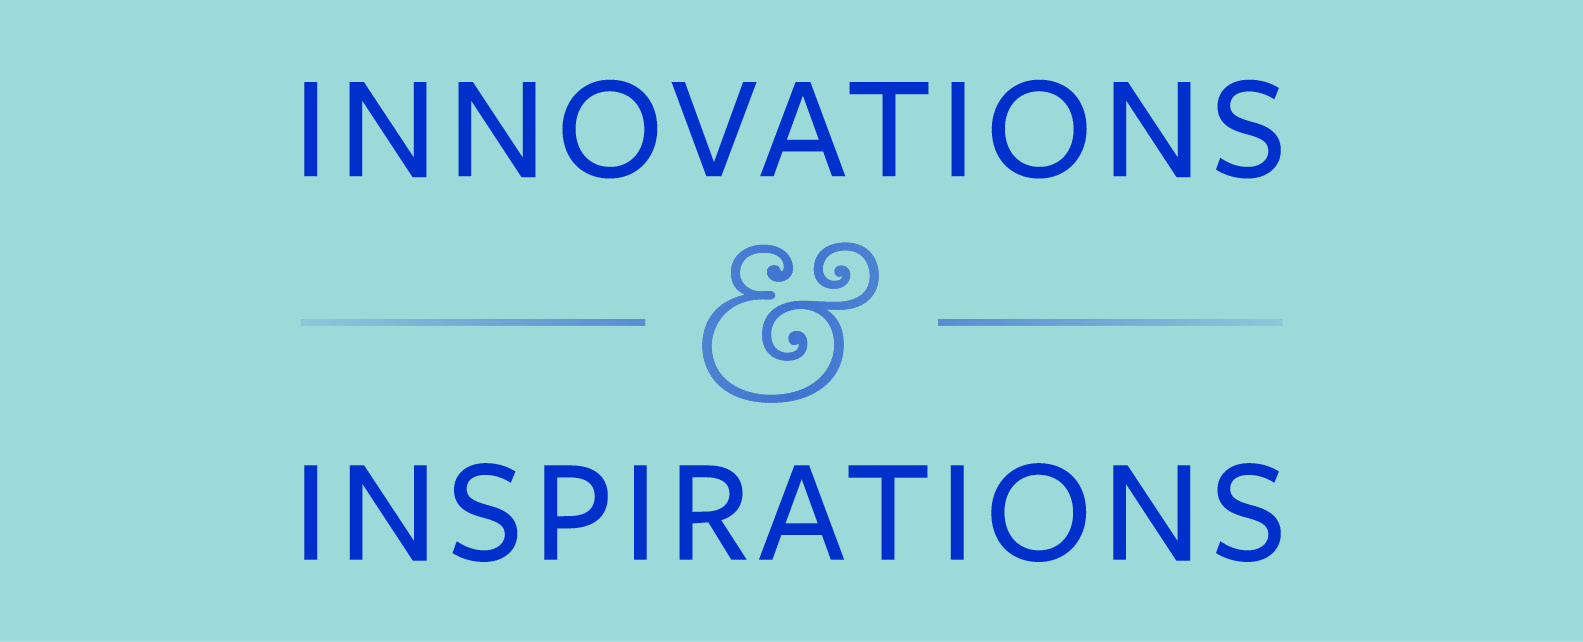 Innovations and Inspirations